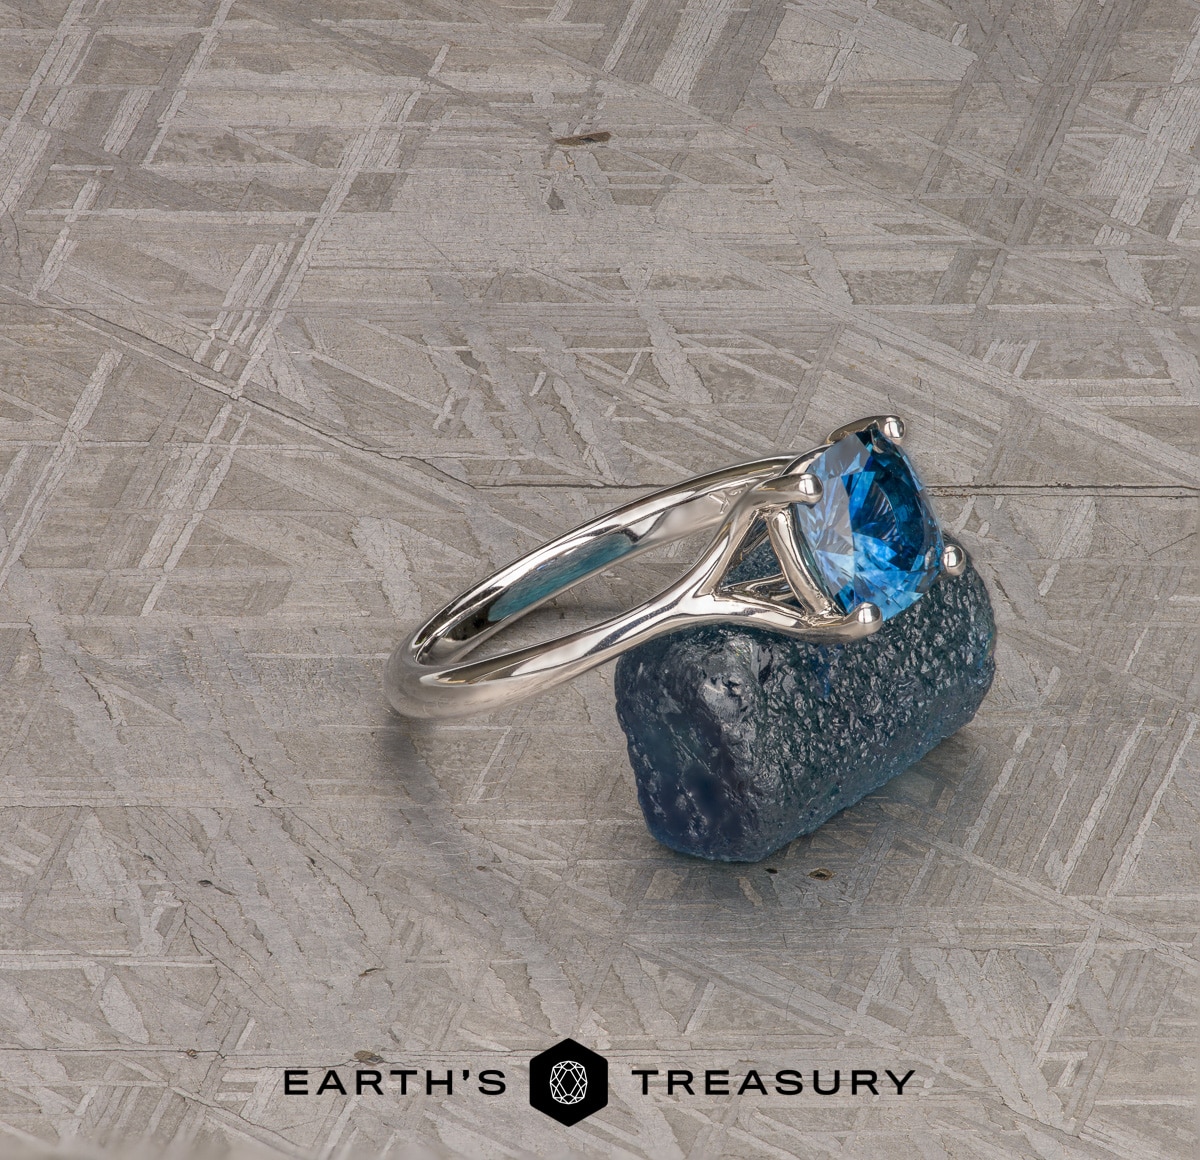 The "Daphne" in 14k white gold with 1.33-Carat Montana Sapphire